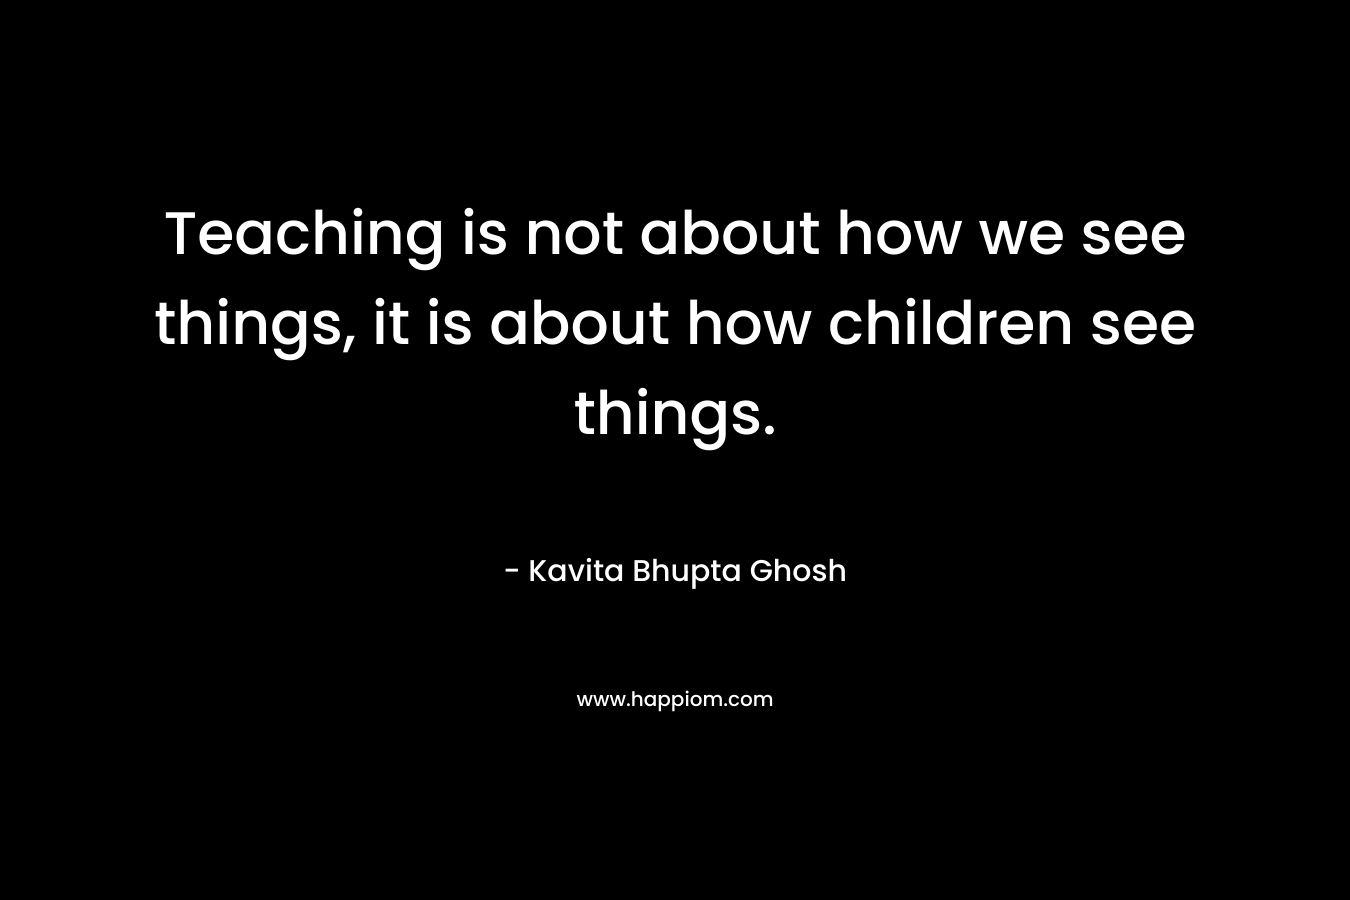 Teaching is not about how we see things, it is about how children see things.